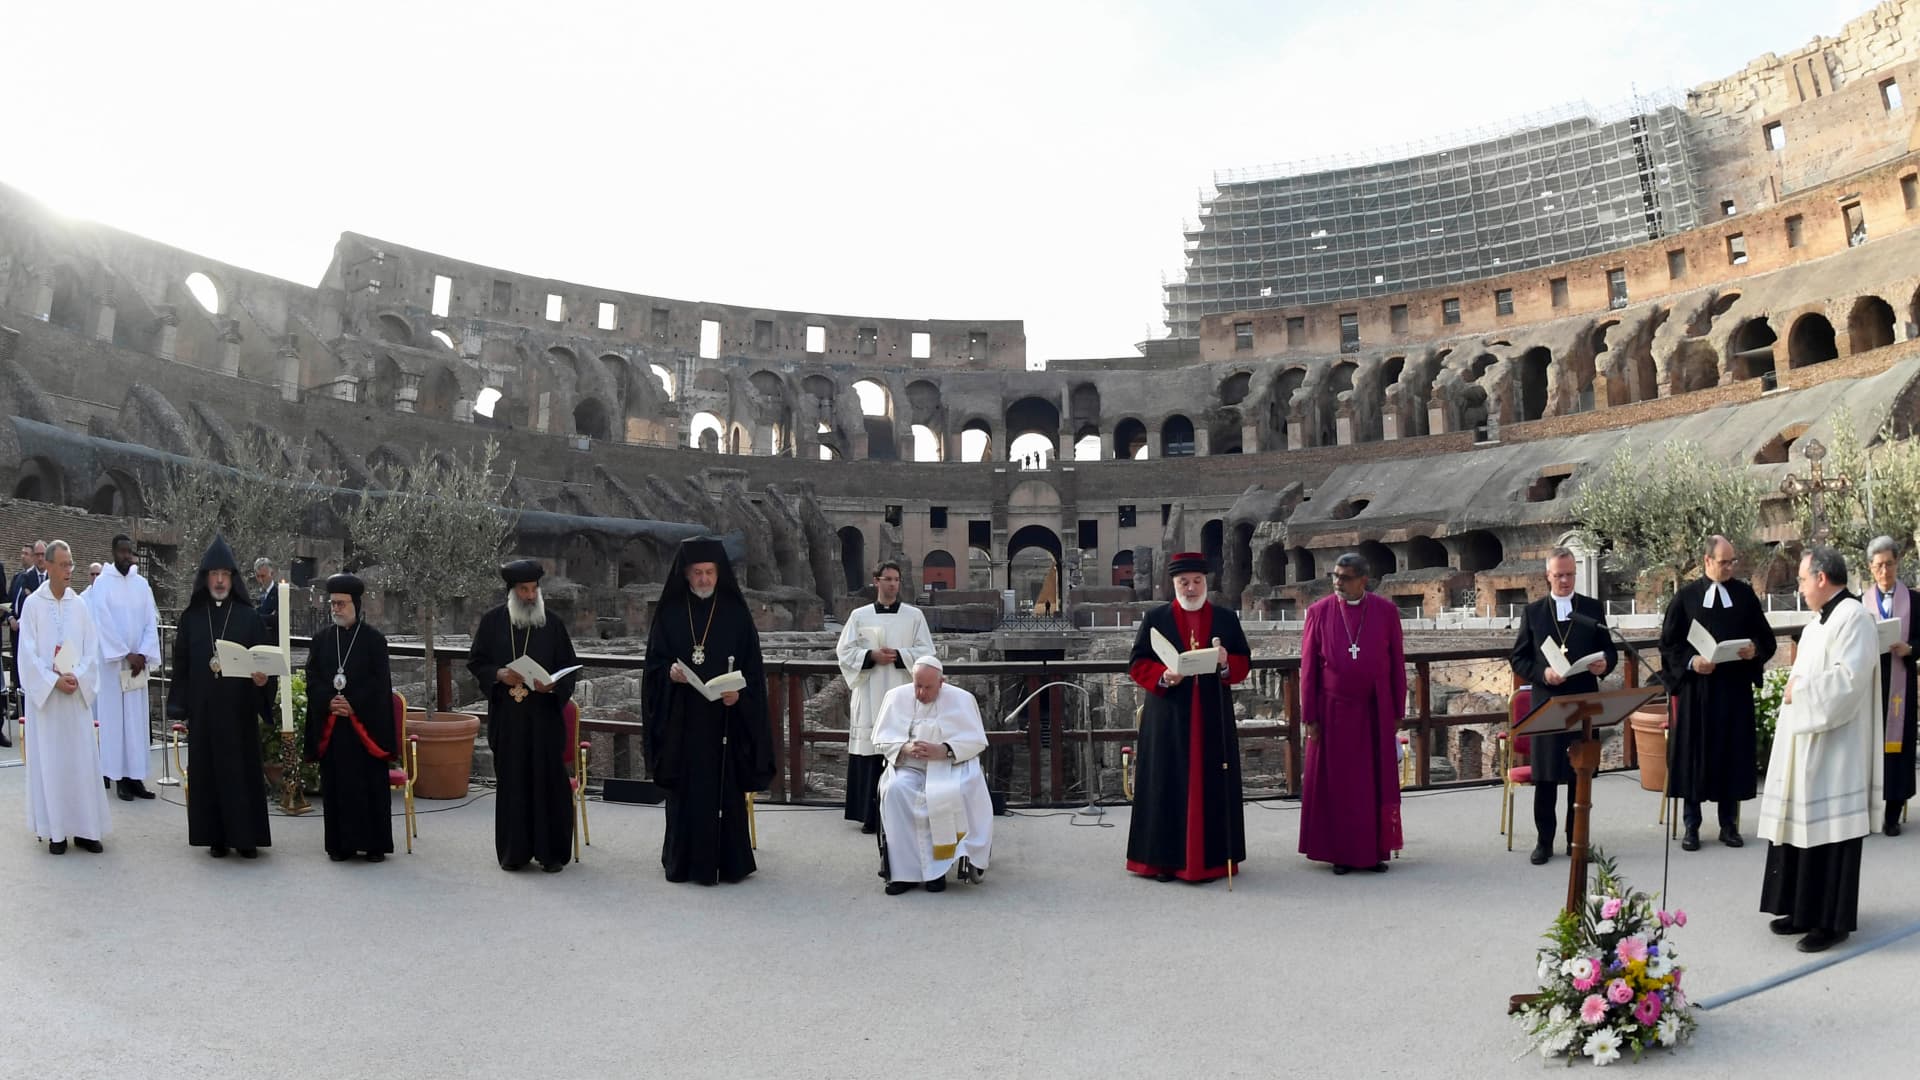 Pope Francis leads an inter-religious prayer for peace at the Colosseum in Rome, Italy, October 25, 2022.